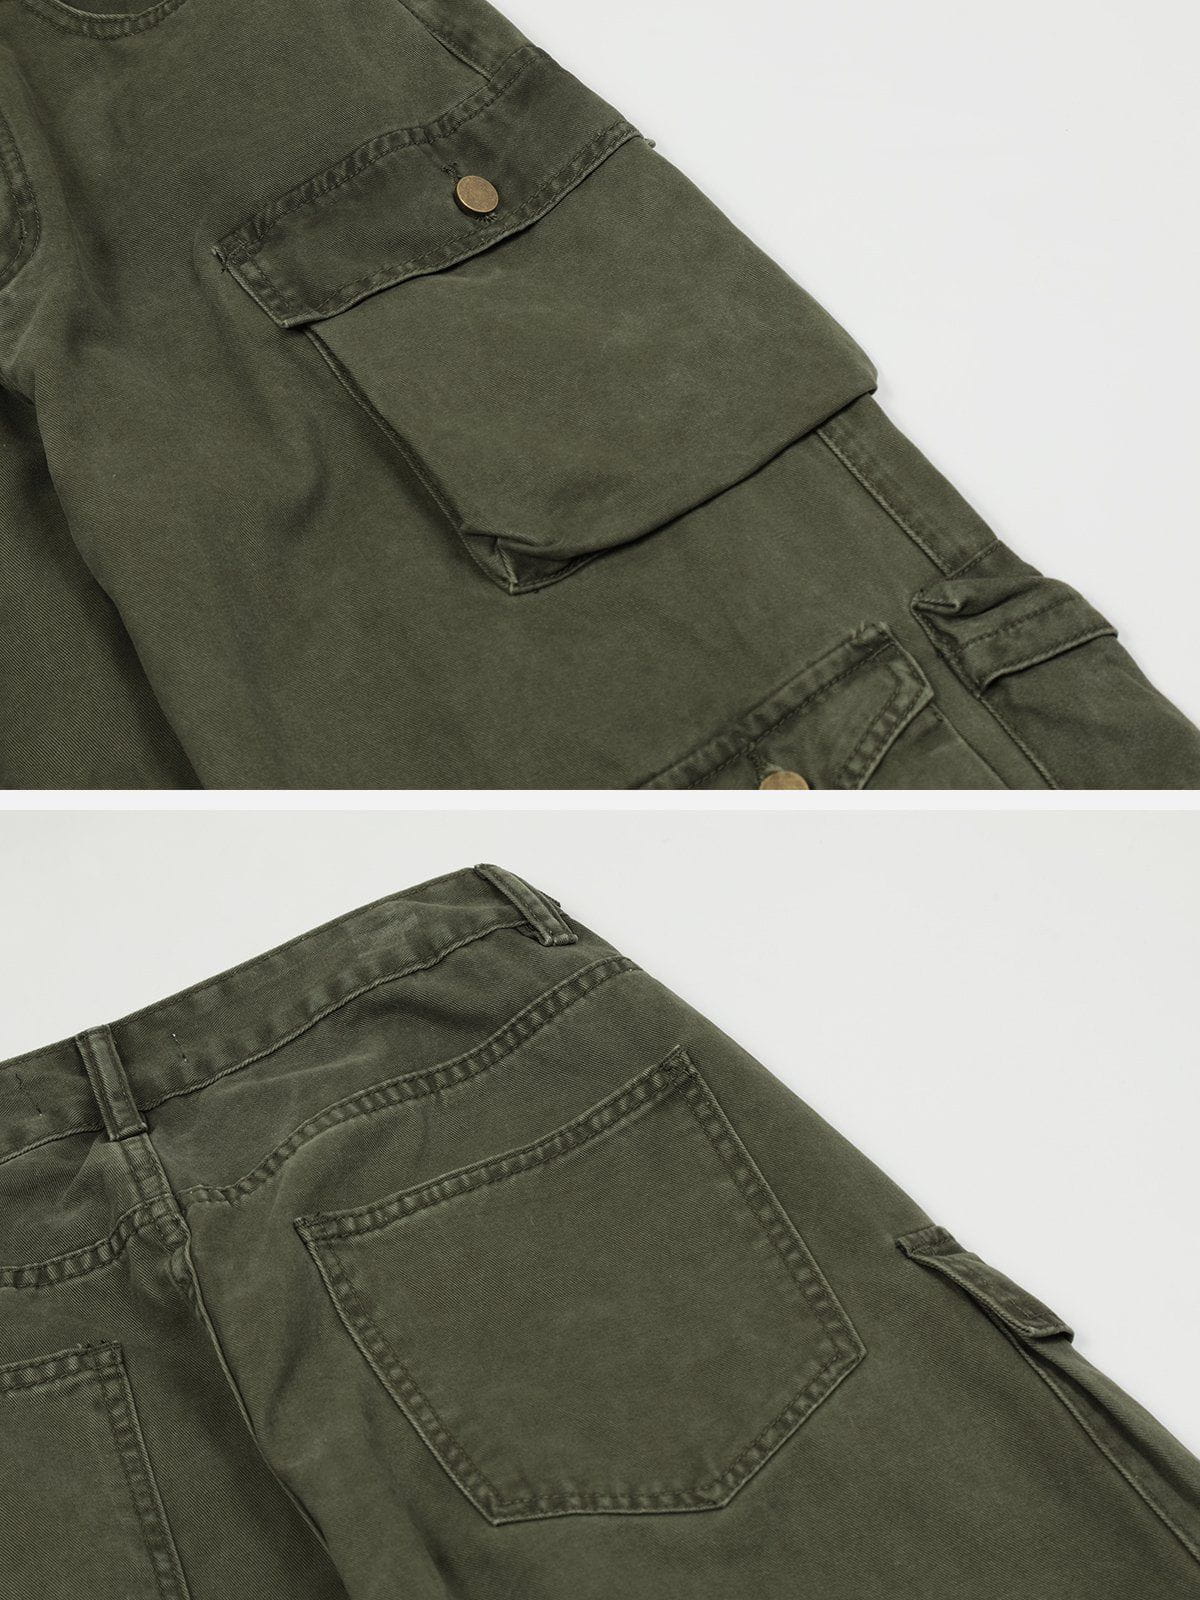 Vintage Multi-Pocket Patched Cargo Jeans - SWS Store⎮ Streetwear –  Streetwear Society Store